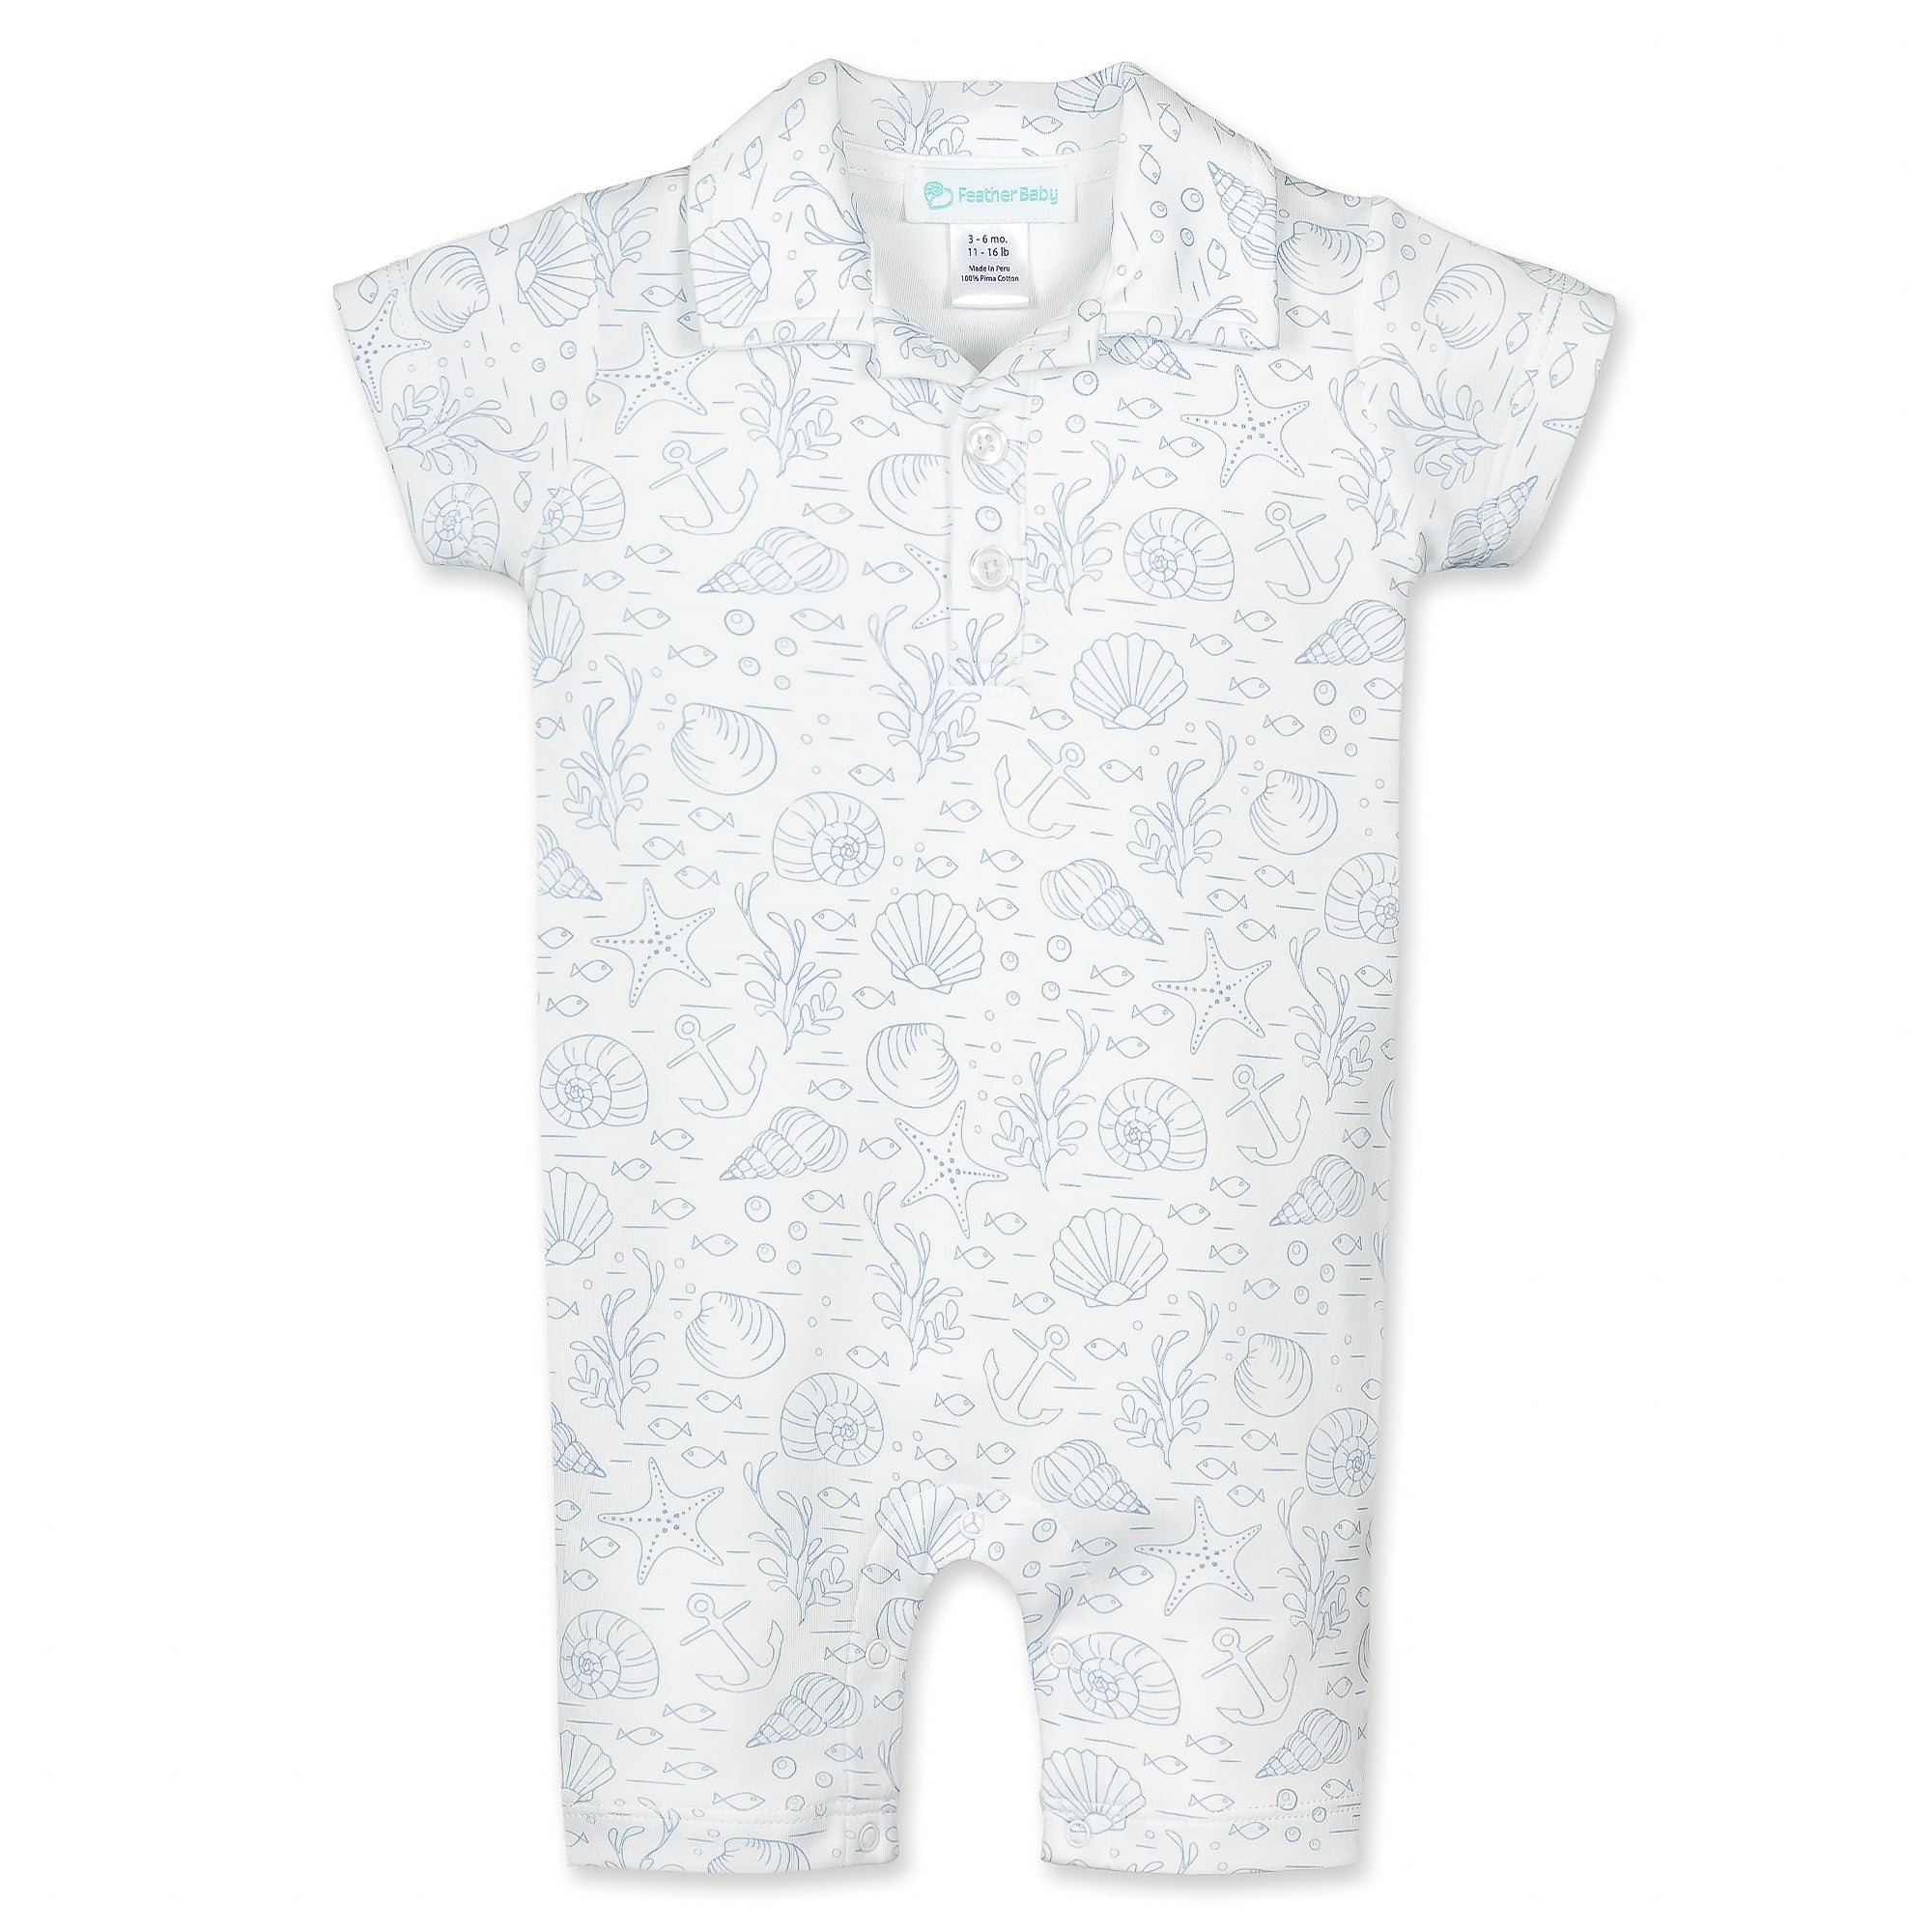 Collared Romper - Seashells  100% Pima Cotton by Feather Baby - HoneyBug 